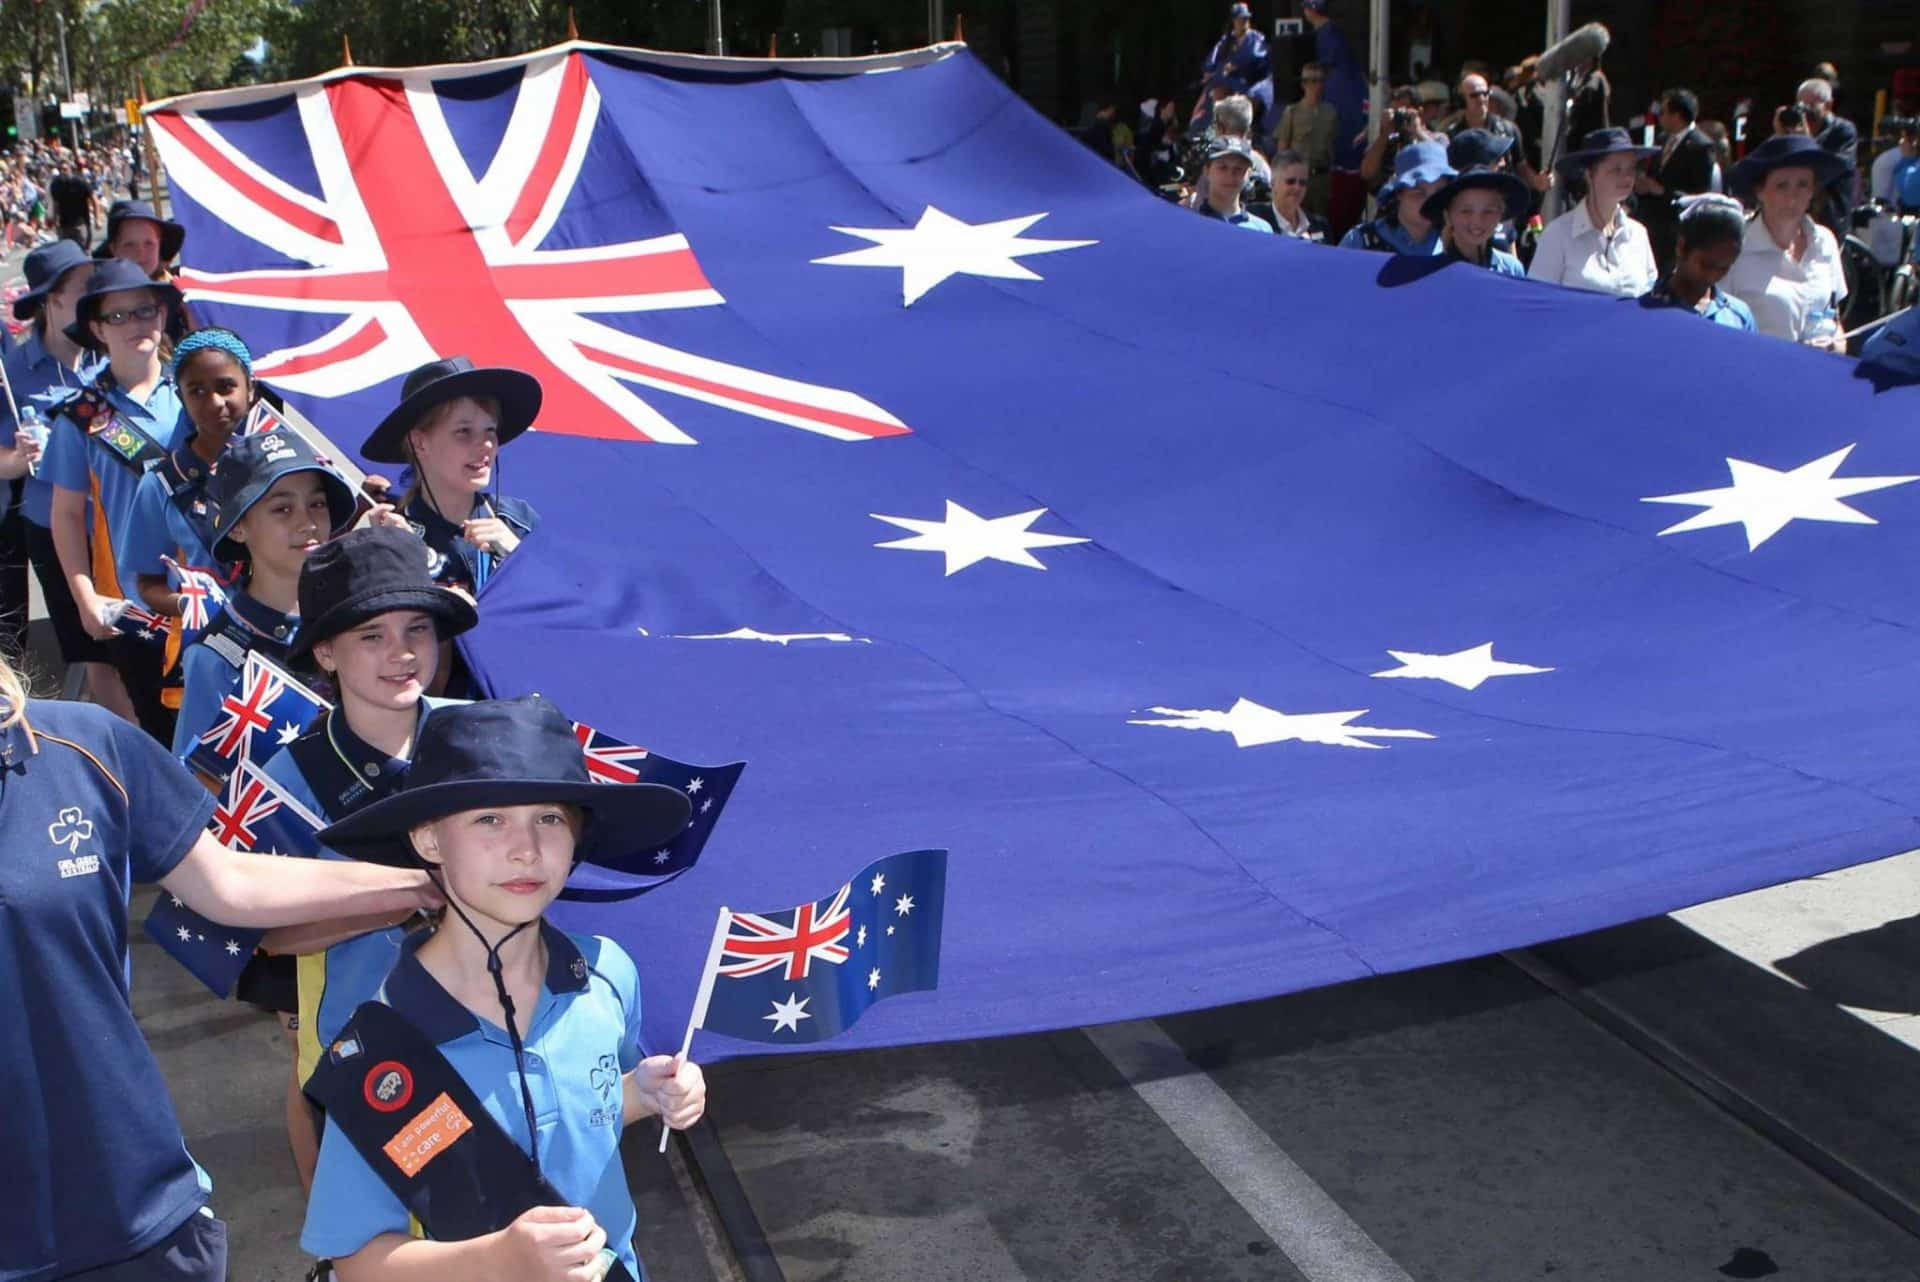 Australia Day on January 26, the date in 1788 the First Fleet landed at Sydney, has traditionally been marked across the country by parades and firework displays ©Getty Images